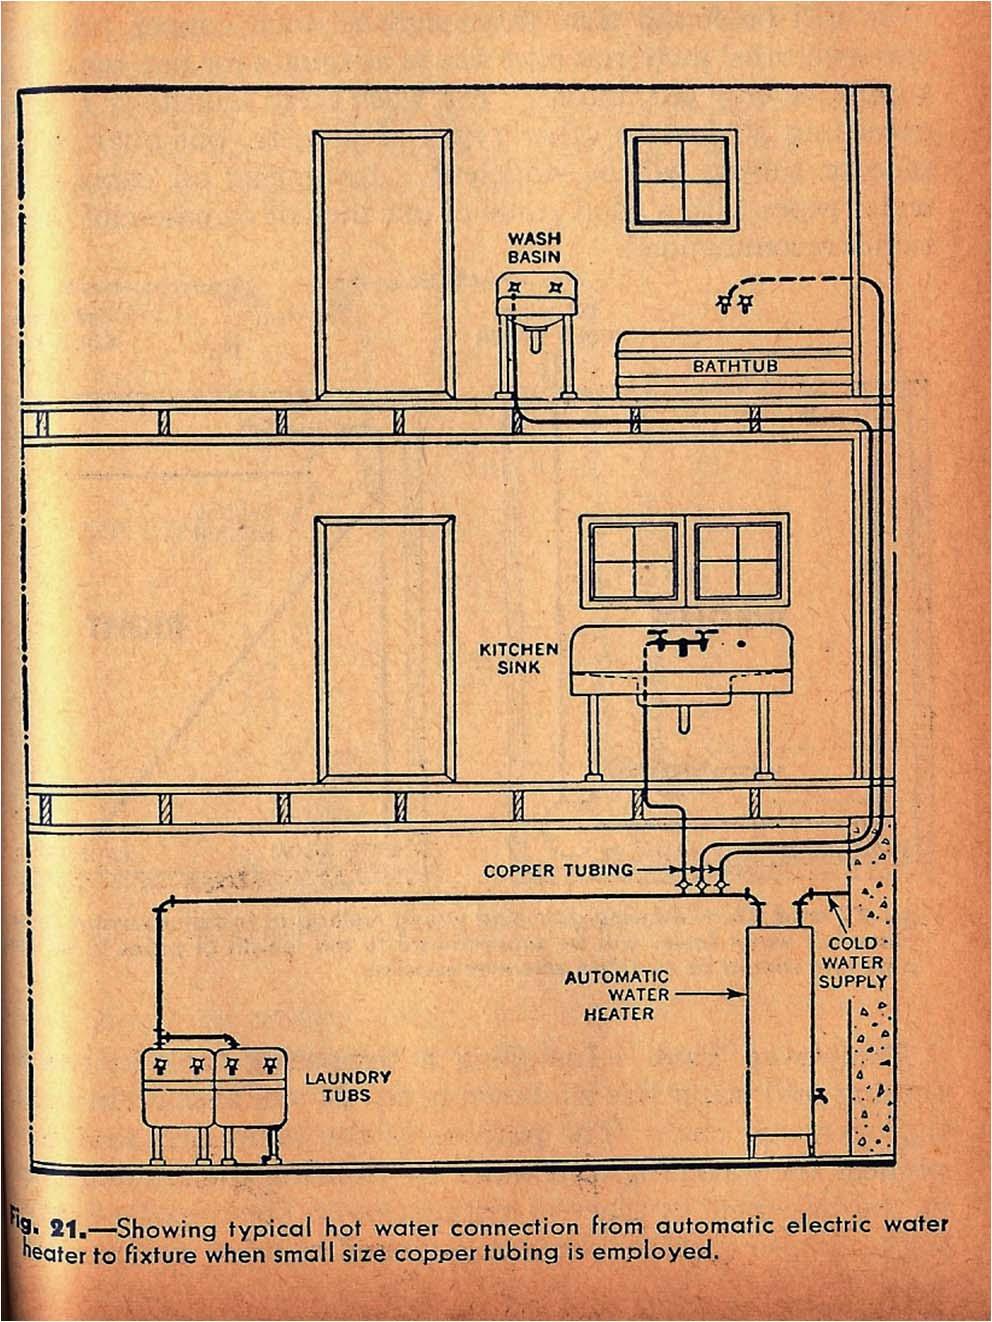 Likewise: From 1960, we have very efficient plumbing,